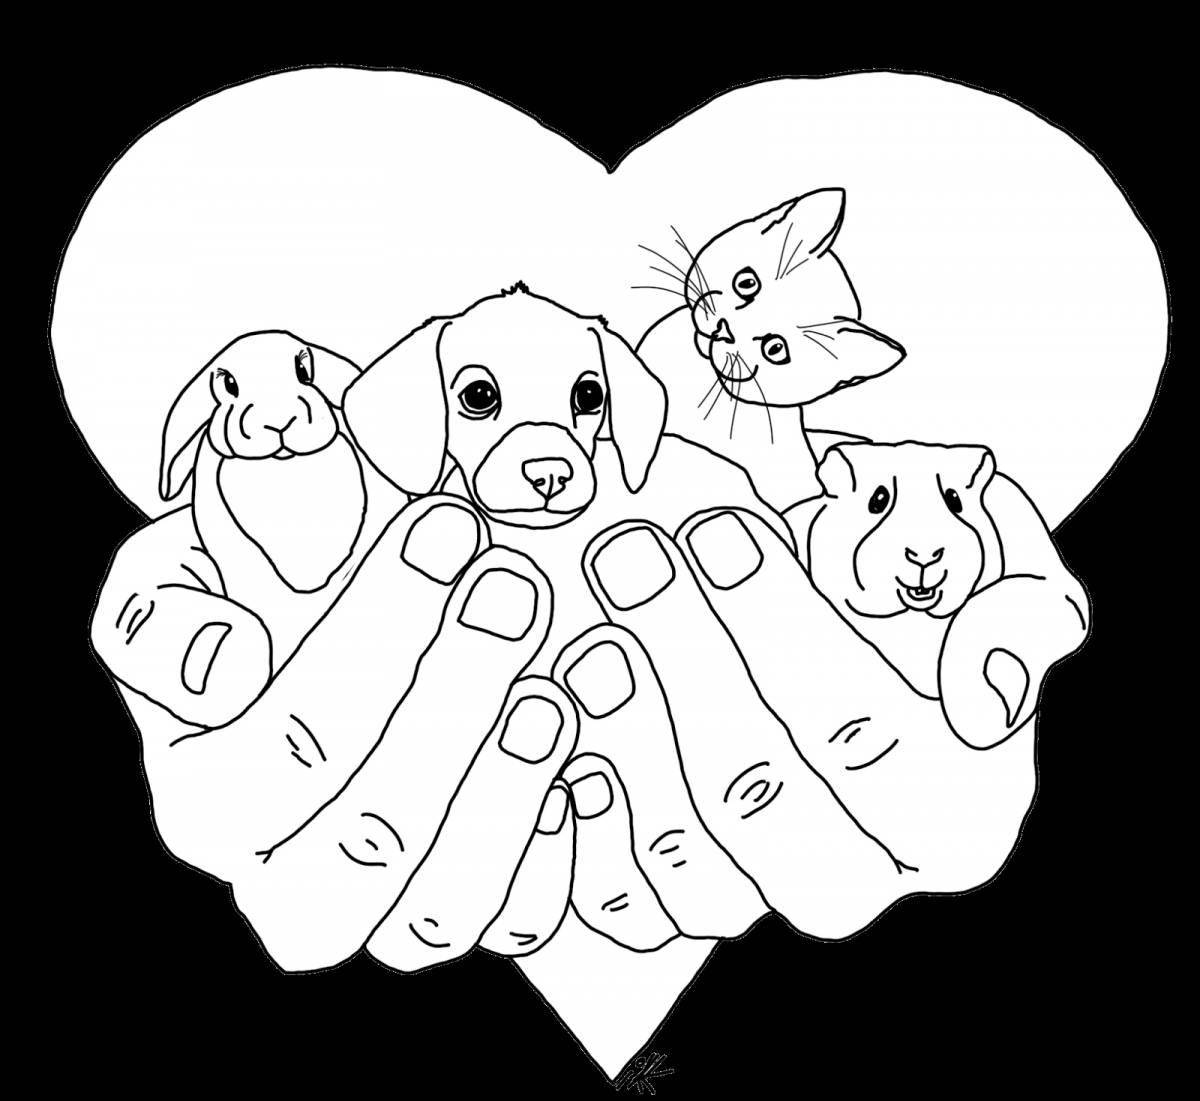 Tender Mercy coloring page